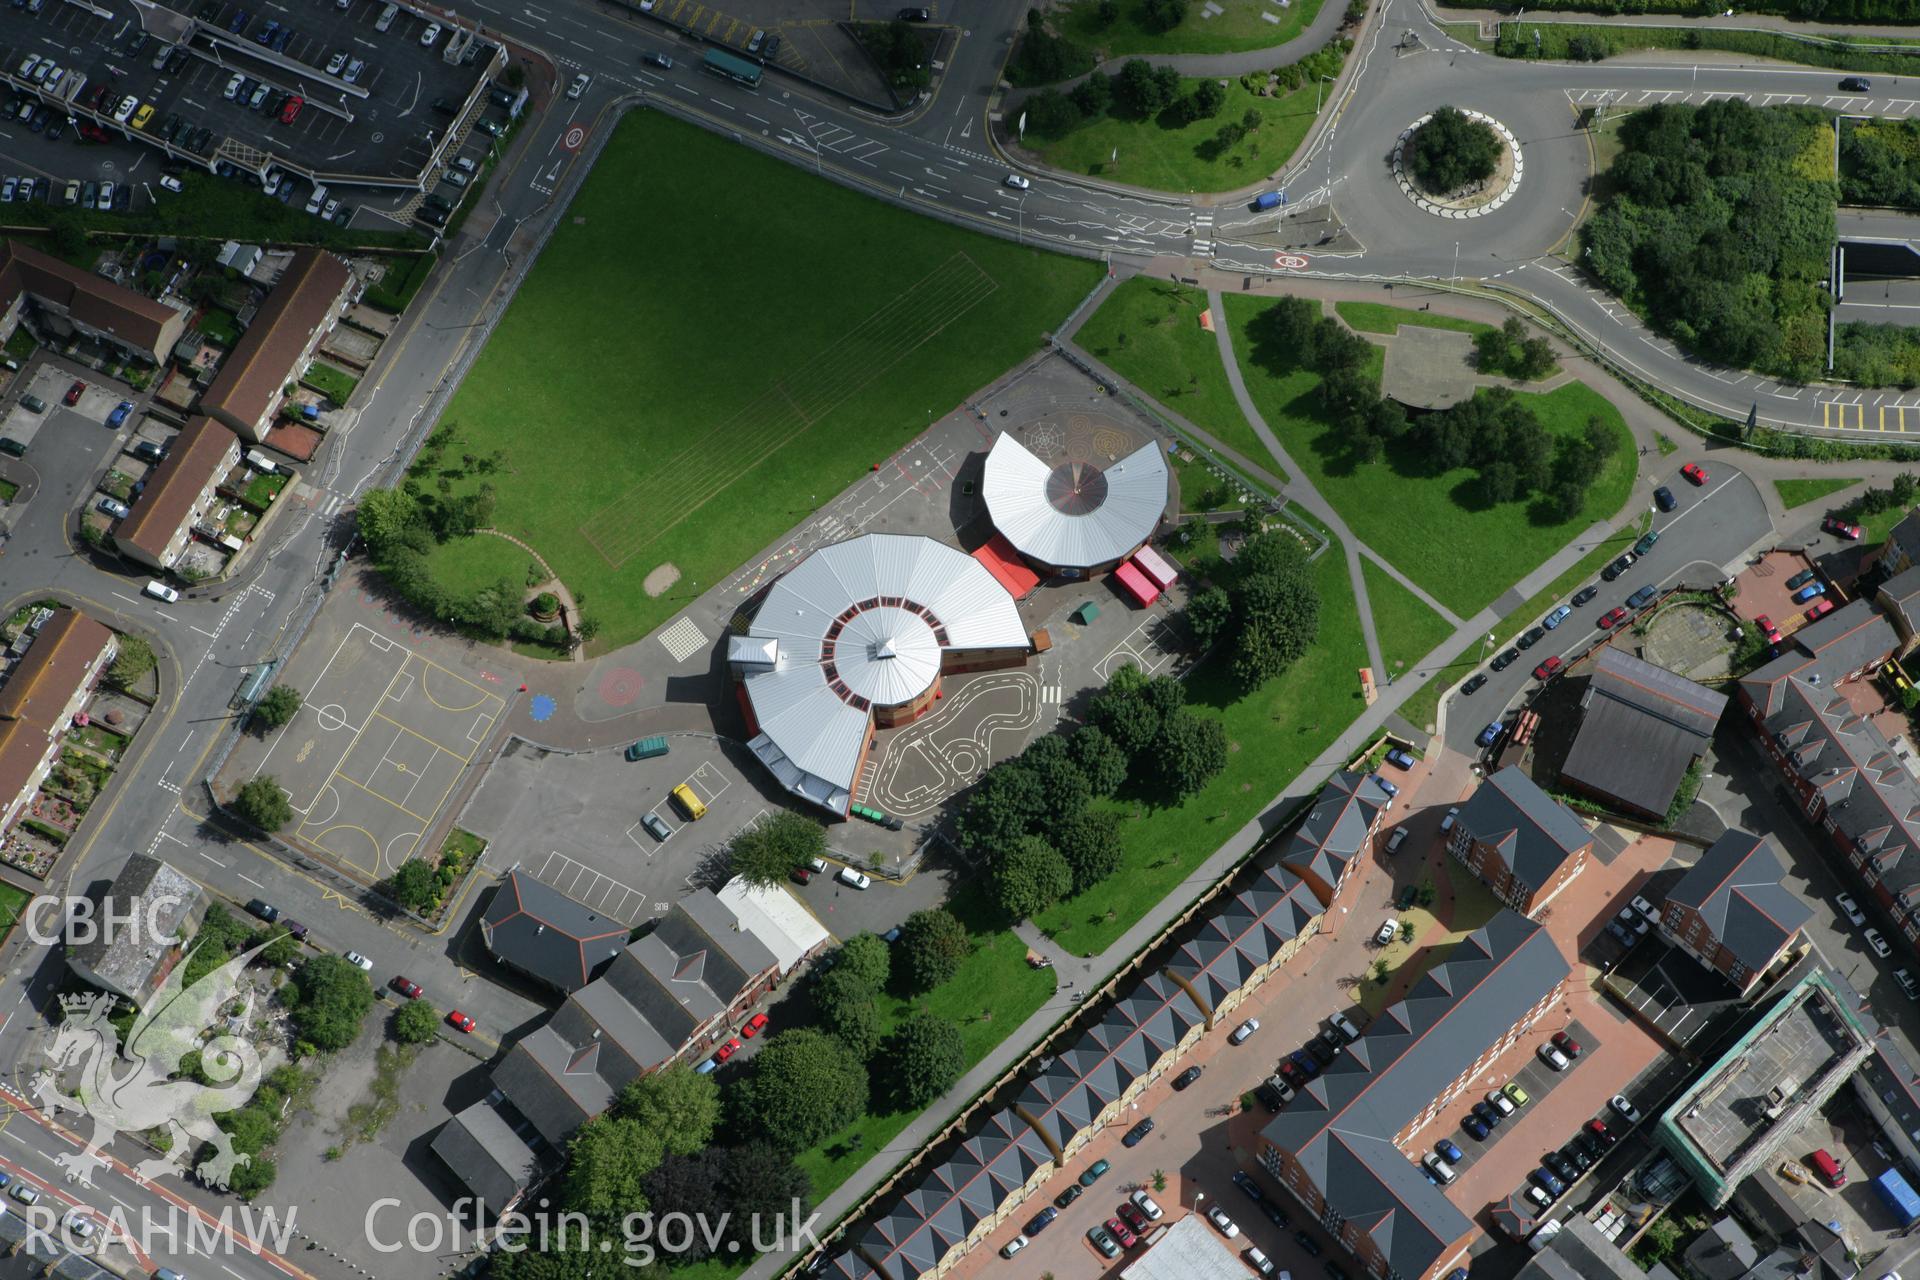 RCAHMW colour oblique aerial photograph of Mountstuart Primary School, Cardiff. Taken on 30 July 2007 by Toby Driver